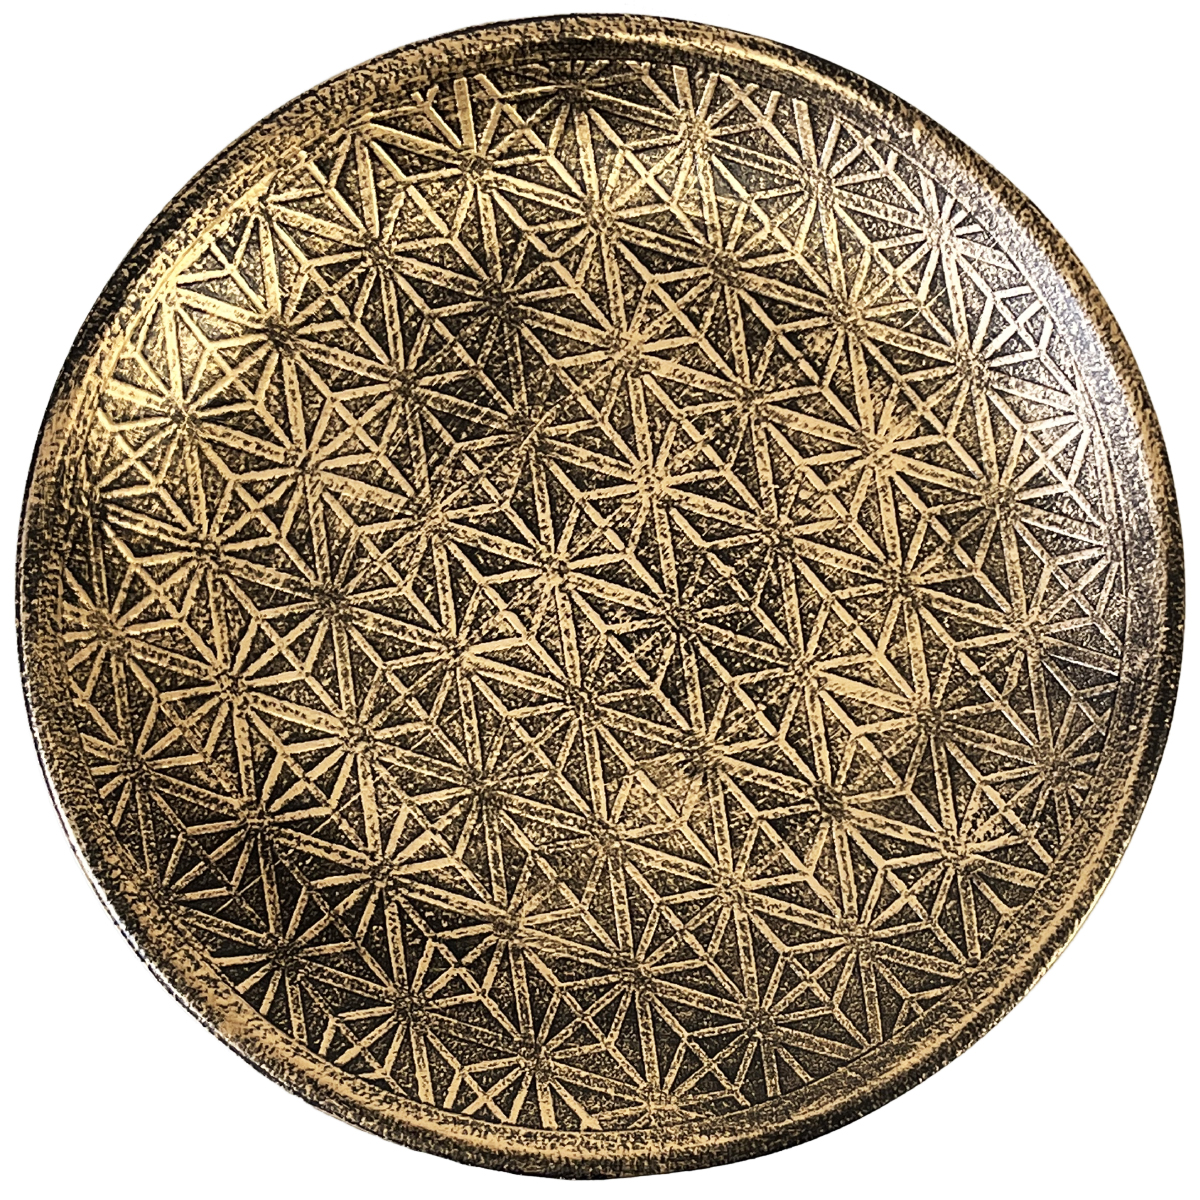 Decorative tray in patinated gold wood